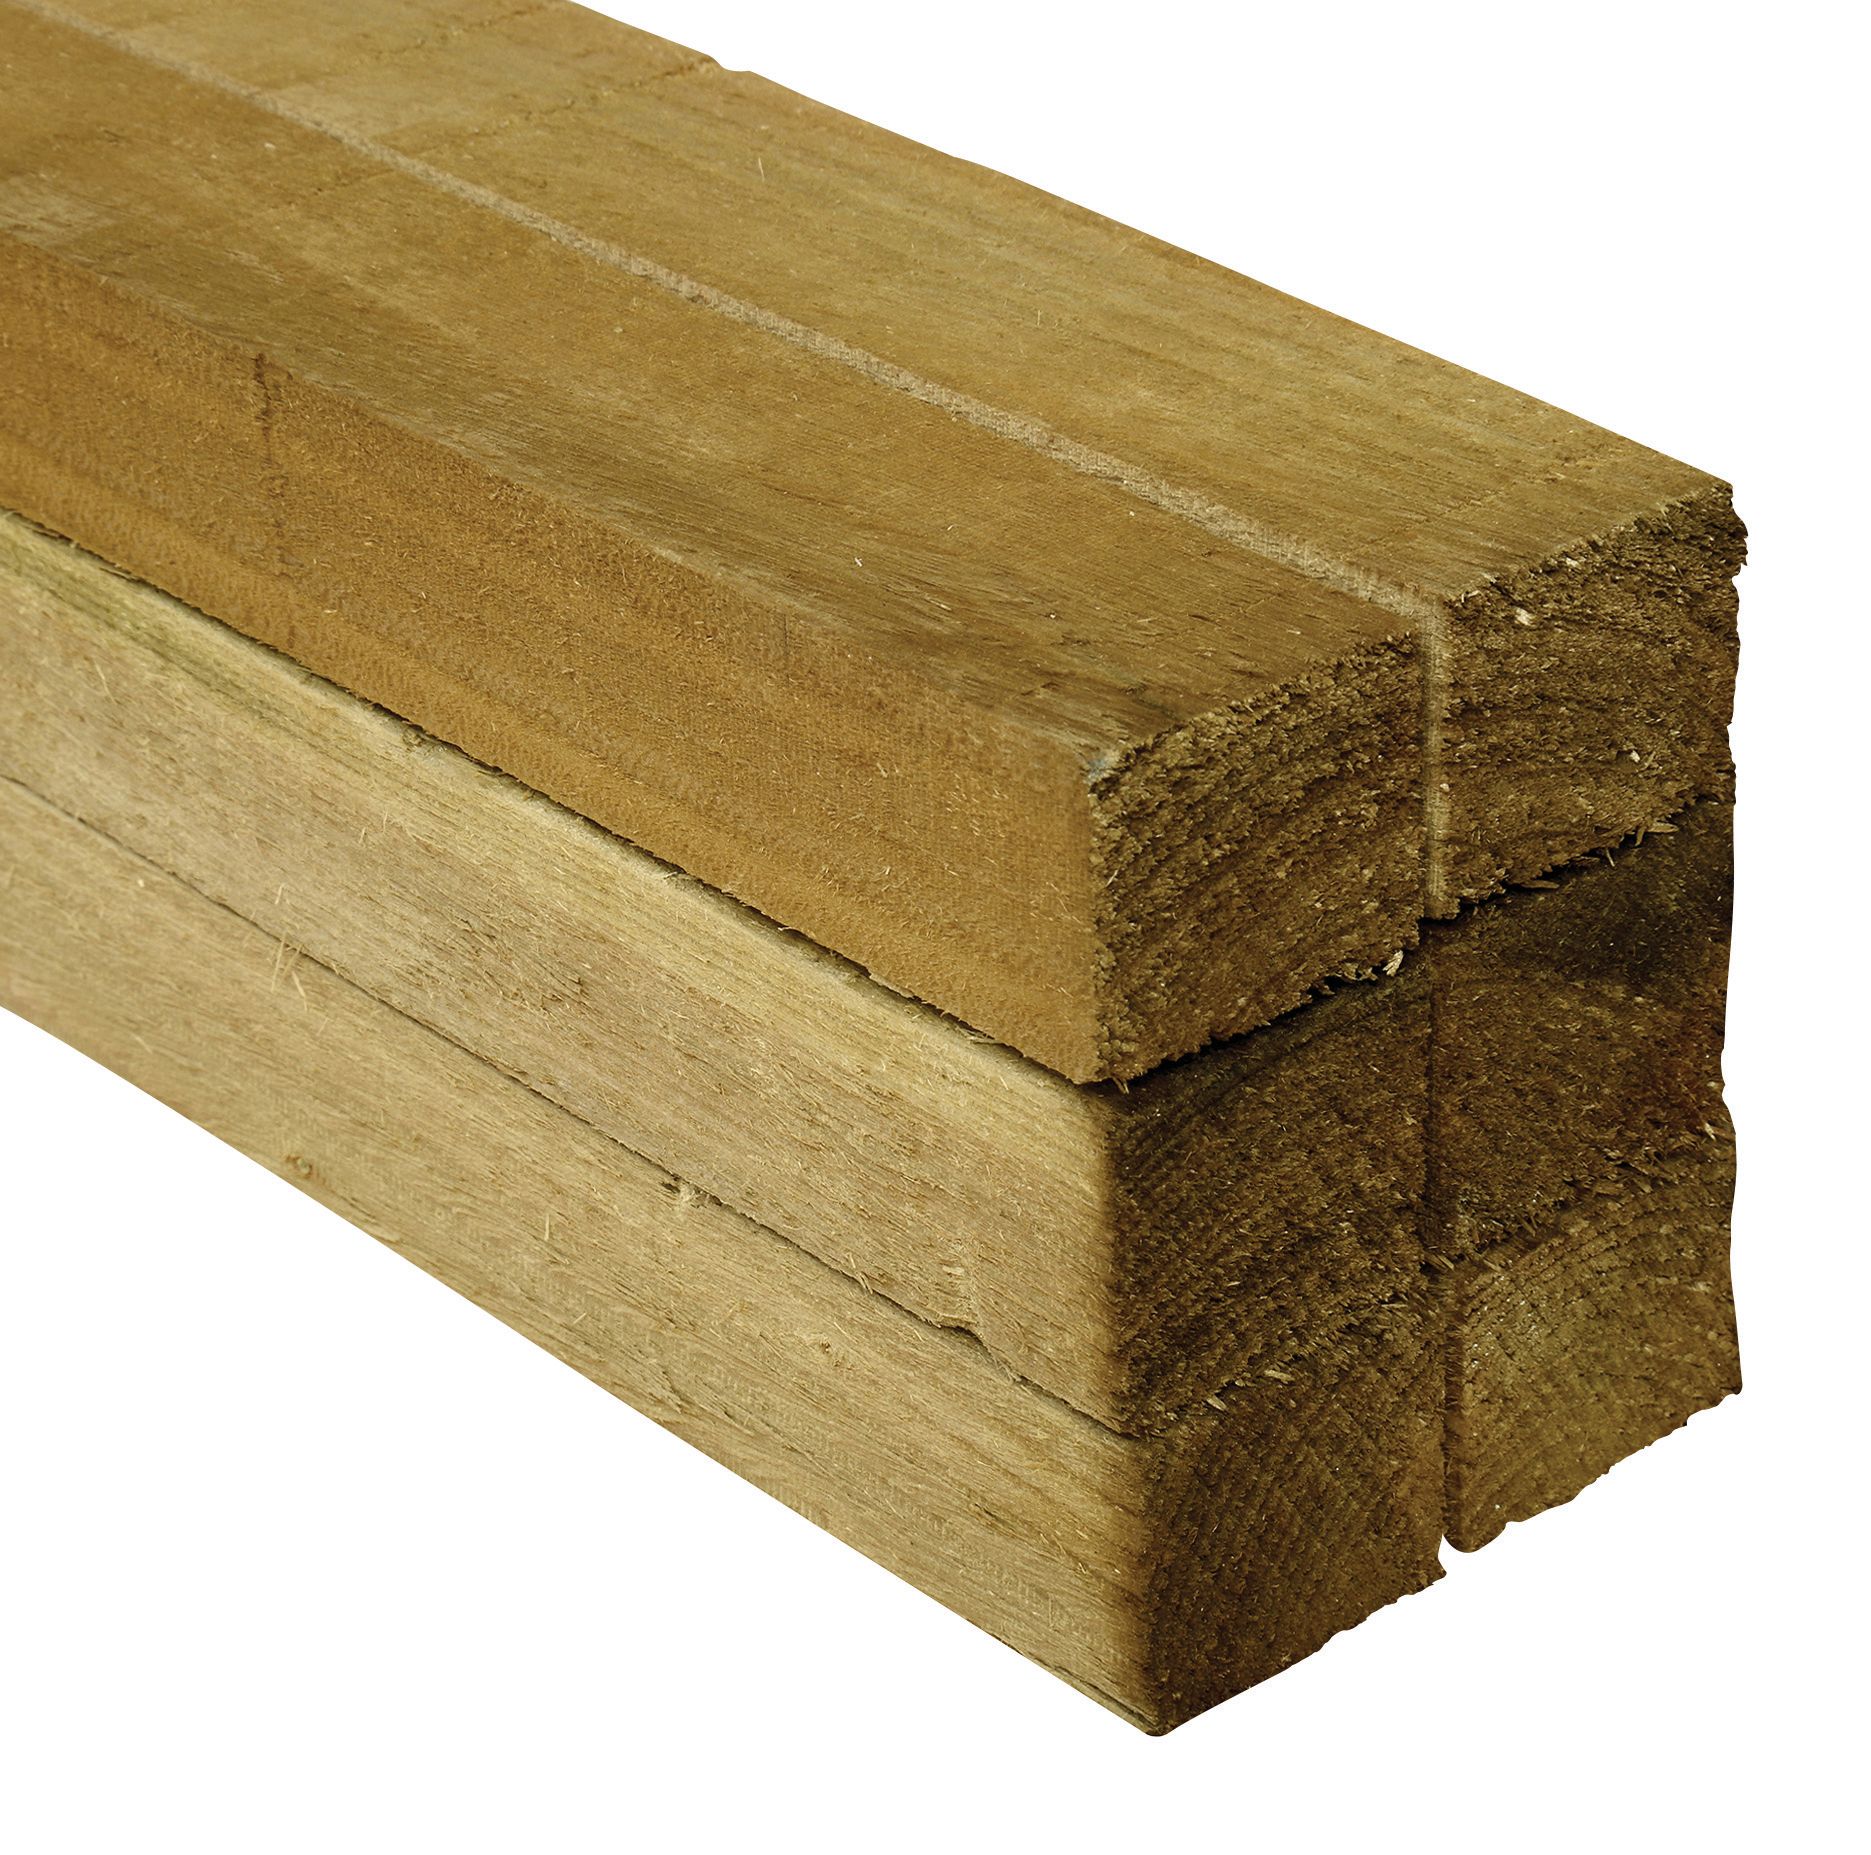 Image of Wickes Treated Sawn Timber - 47 x 47 x 2400mm - Pack of 6